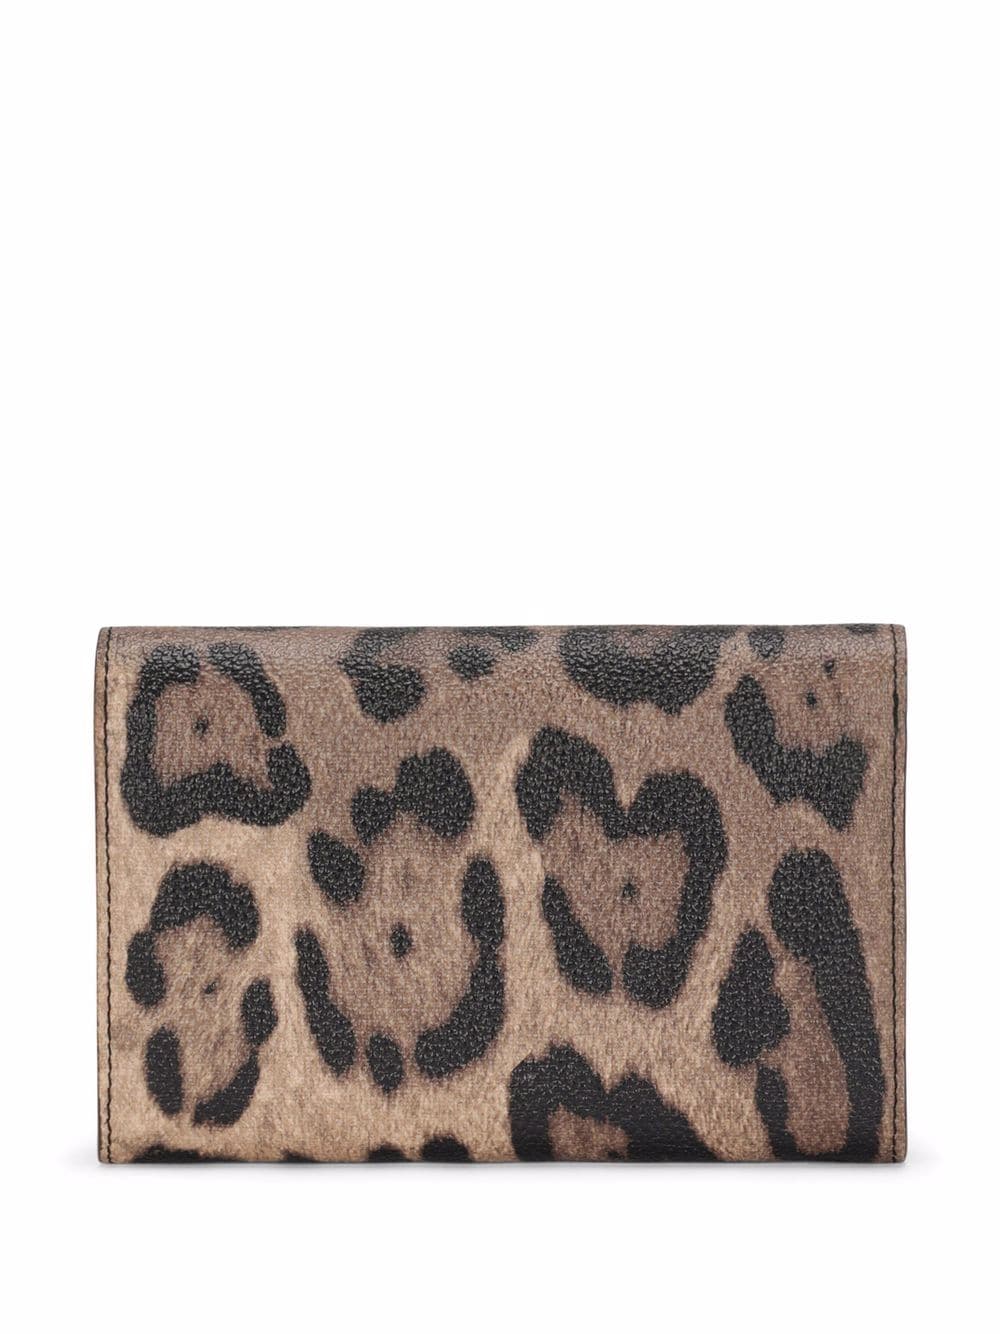 3-fold PU leather wallet with gold-embossed animal print (more